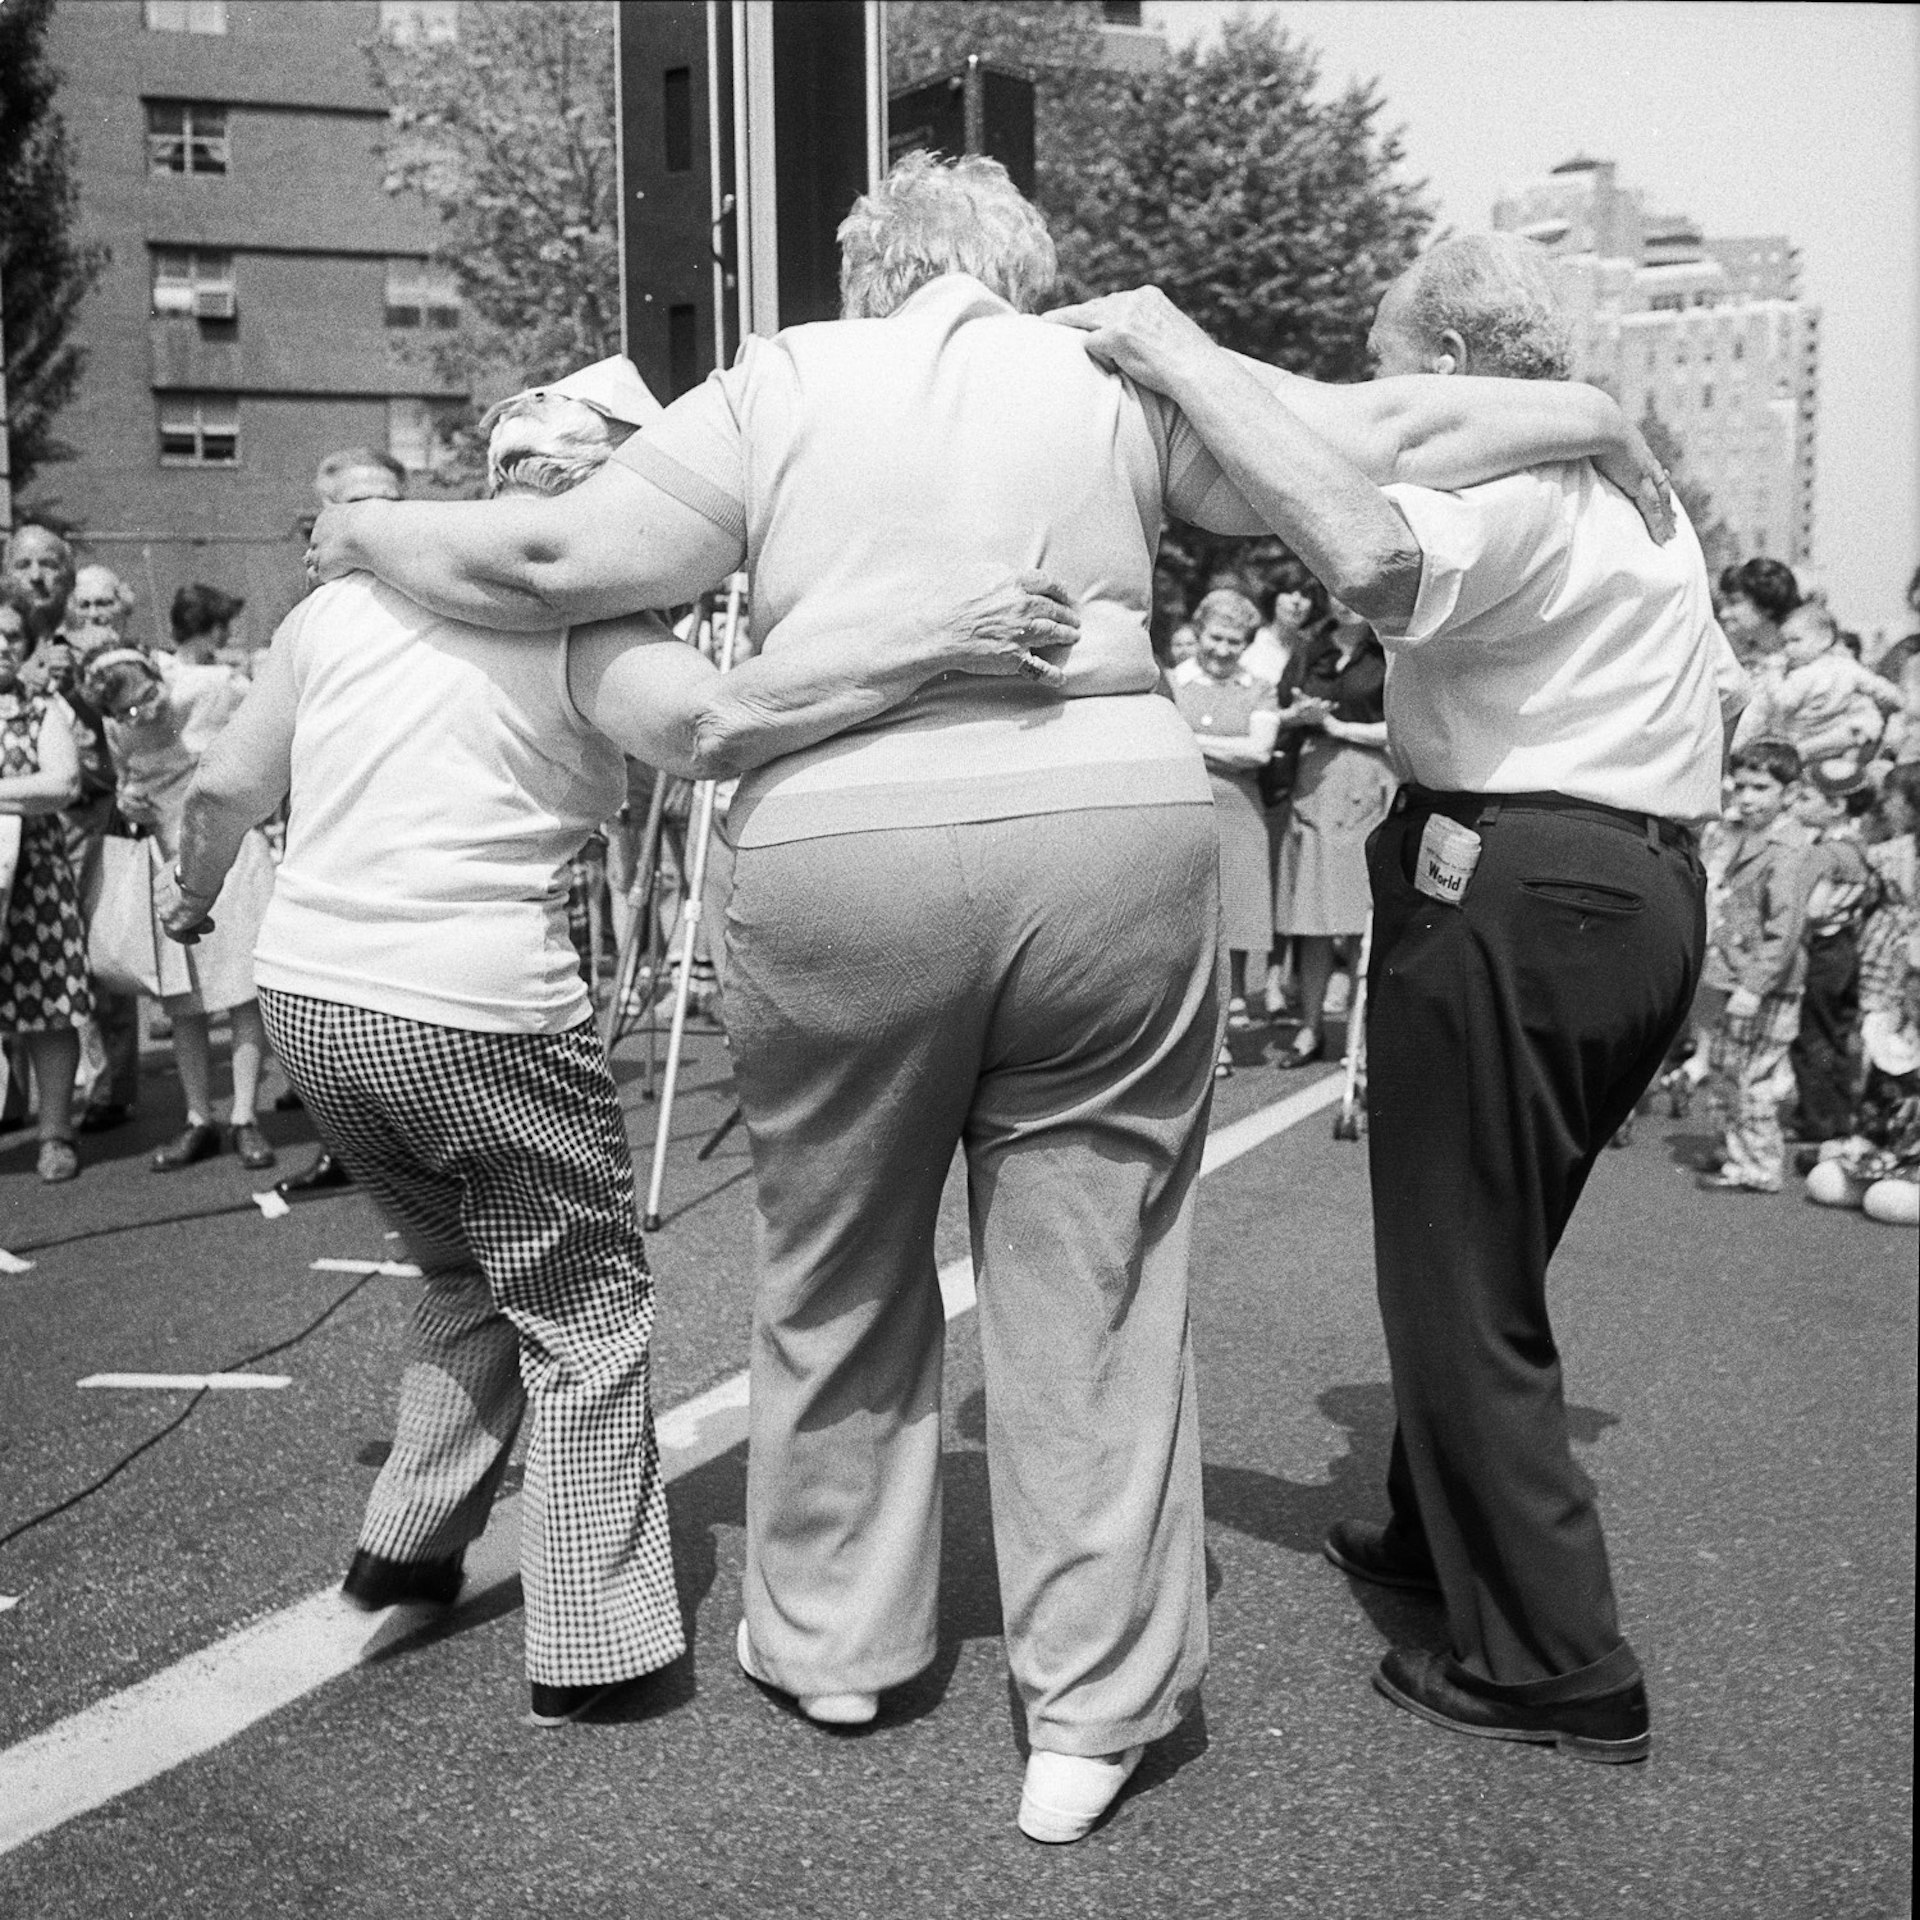 Dancing at the Lower East Side Street Festival NY, NY June 1978